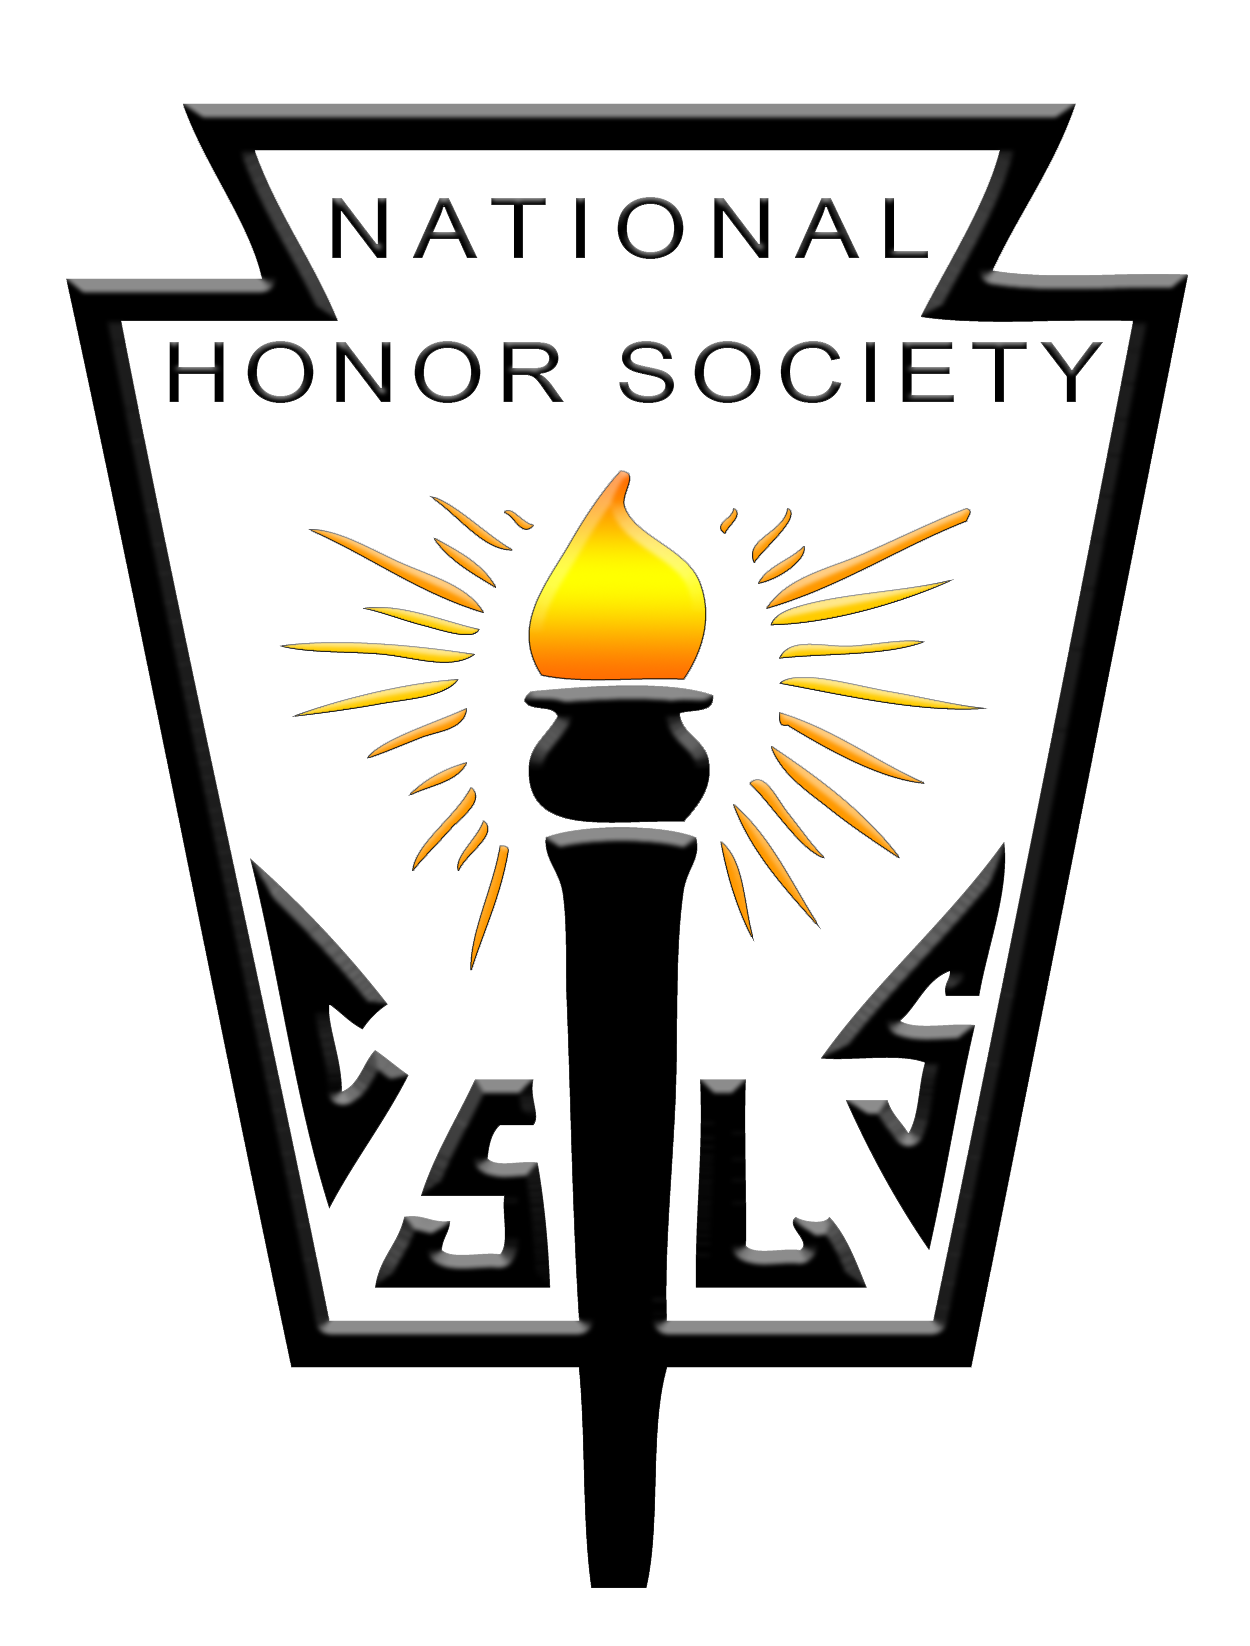 Logo of the group. It's a emblem with a black outline over it and a torch lit up by the center.